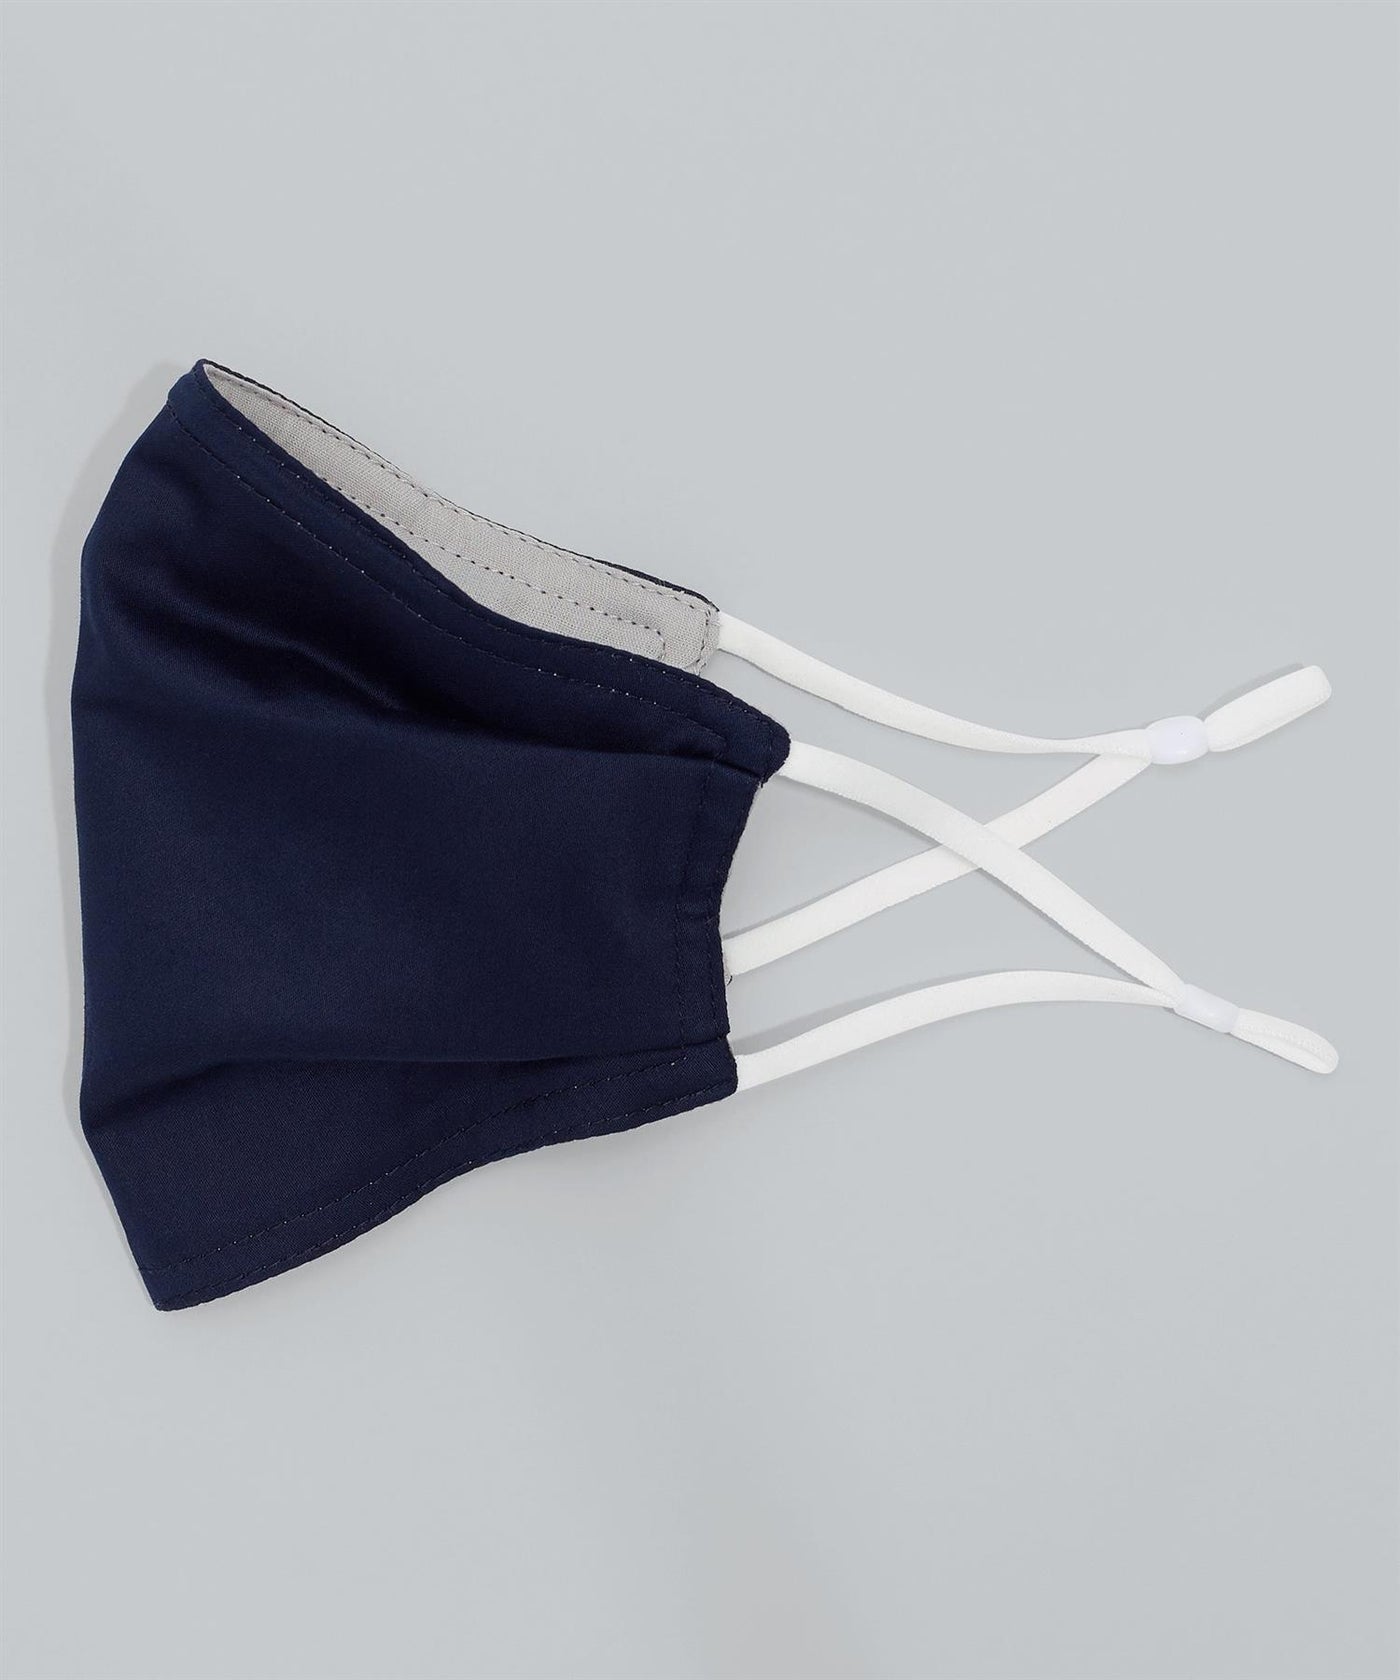 Solid Cotton Mask Navy